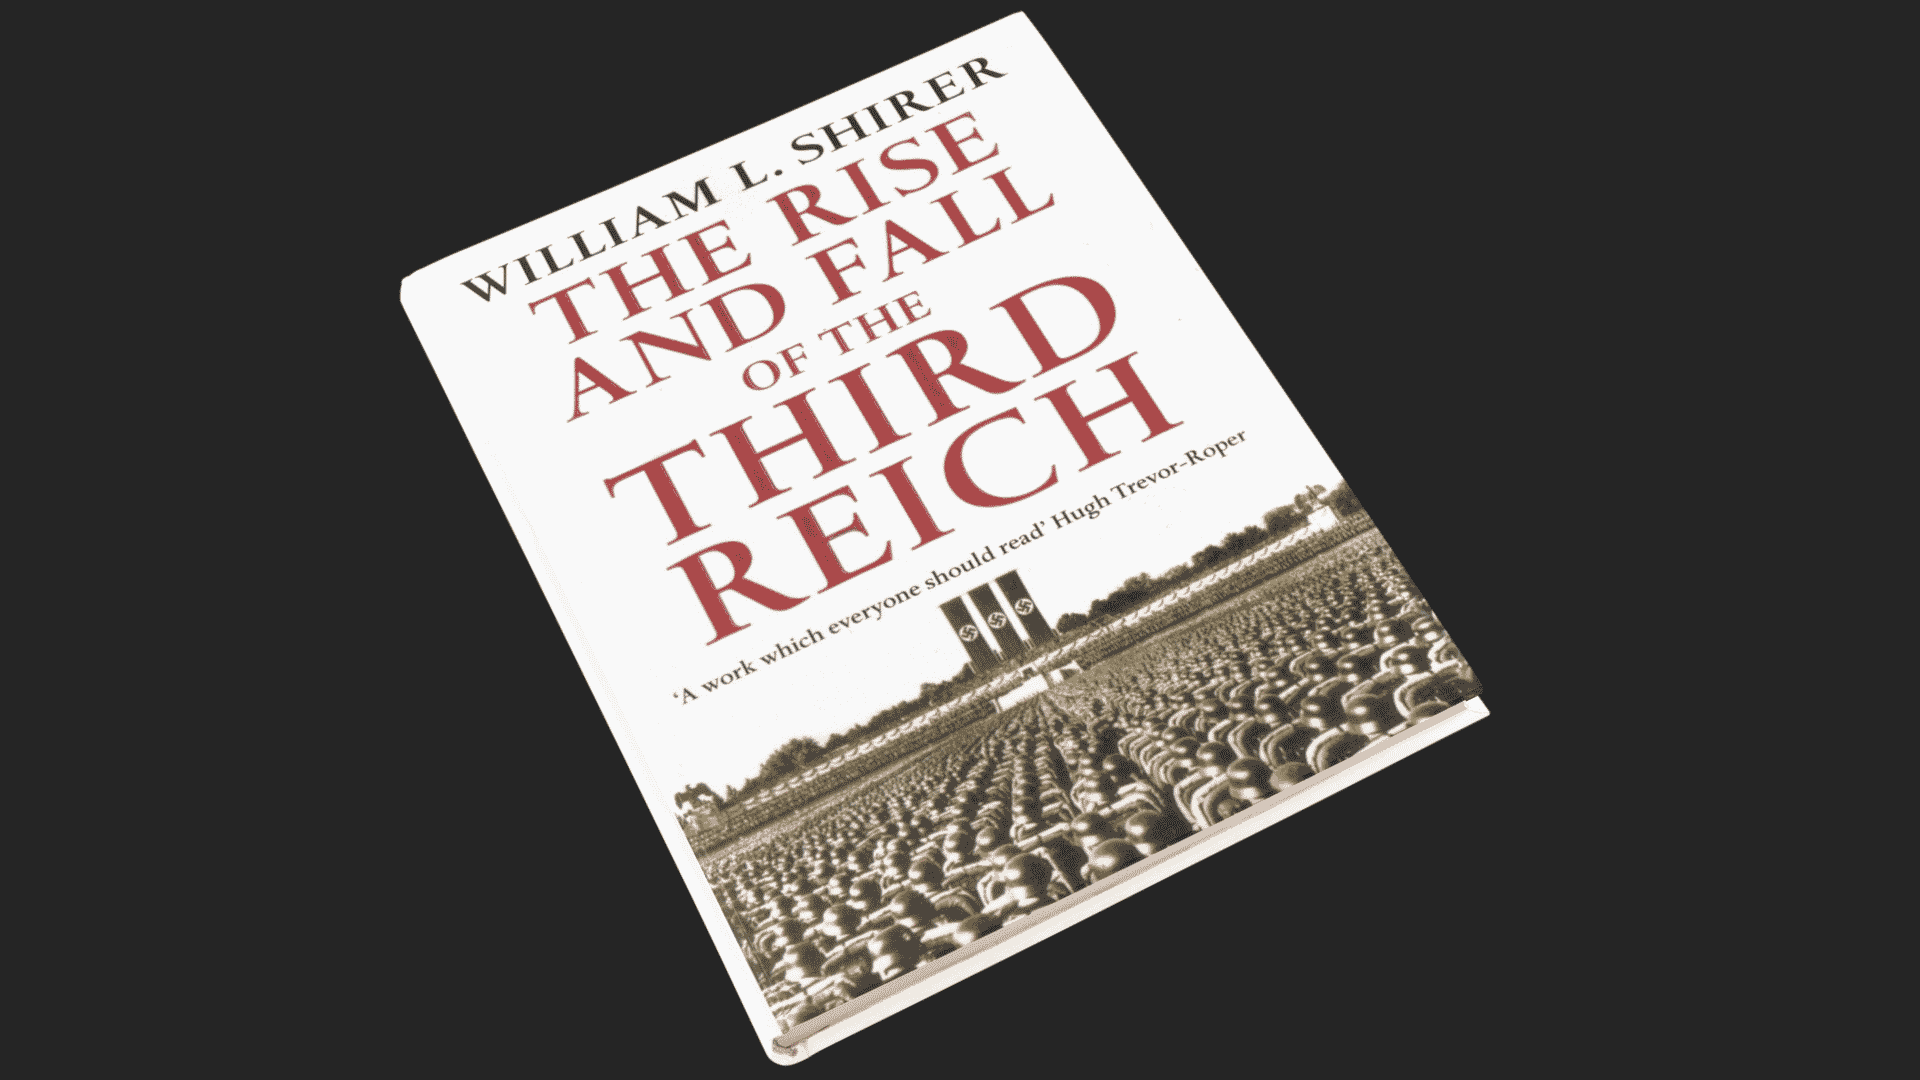 Reflections on ‘The Rise and Fall of the Third Reich’